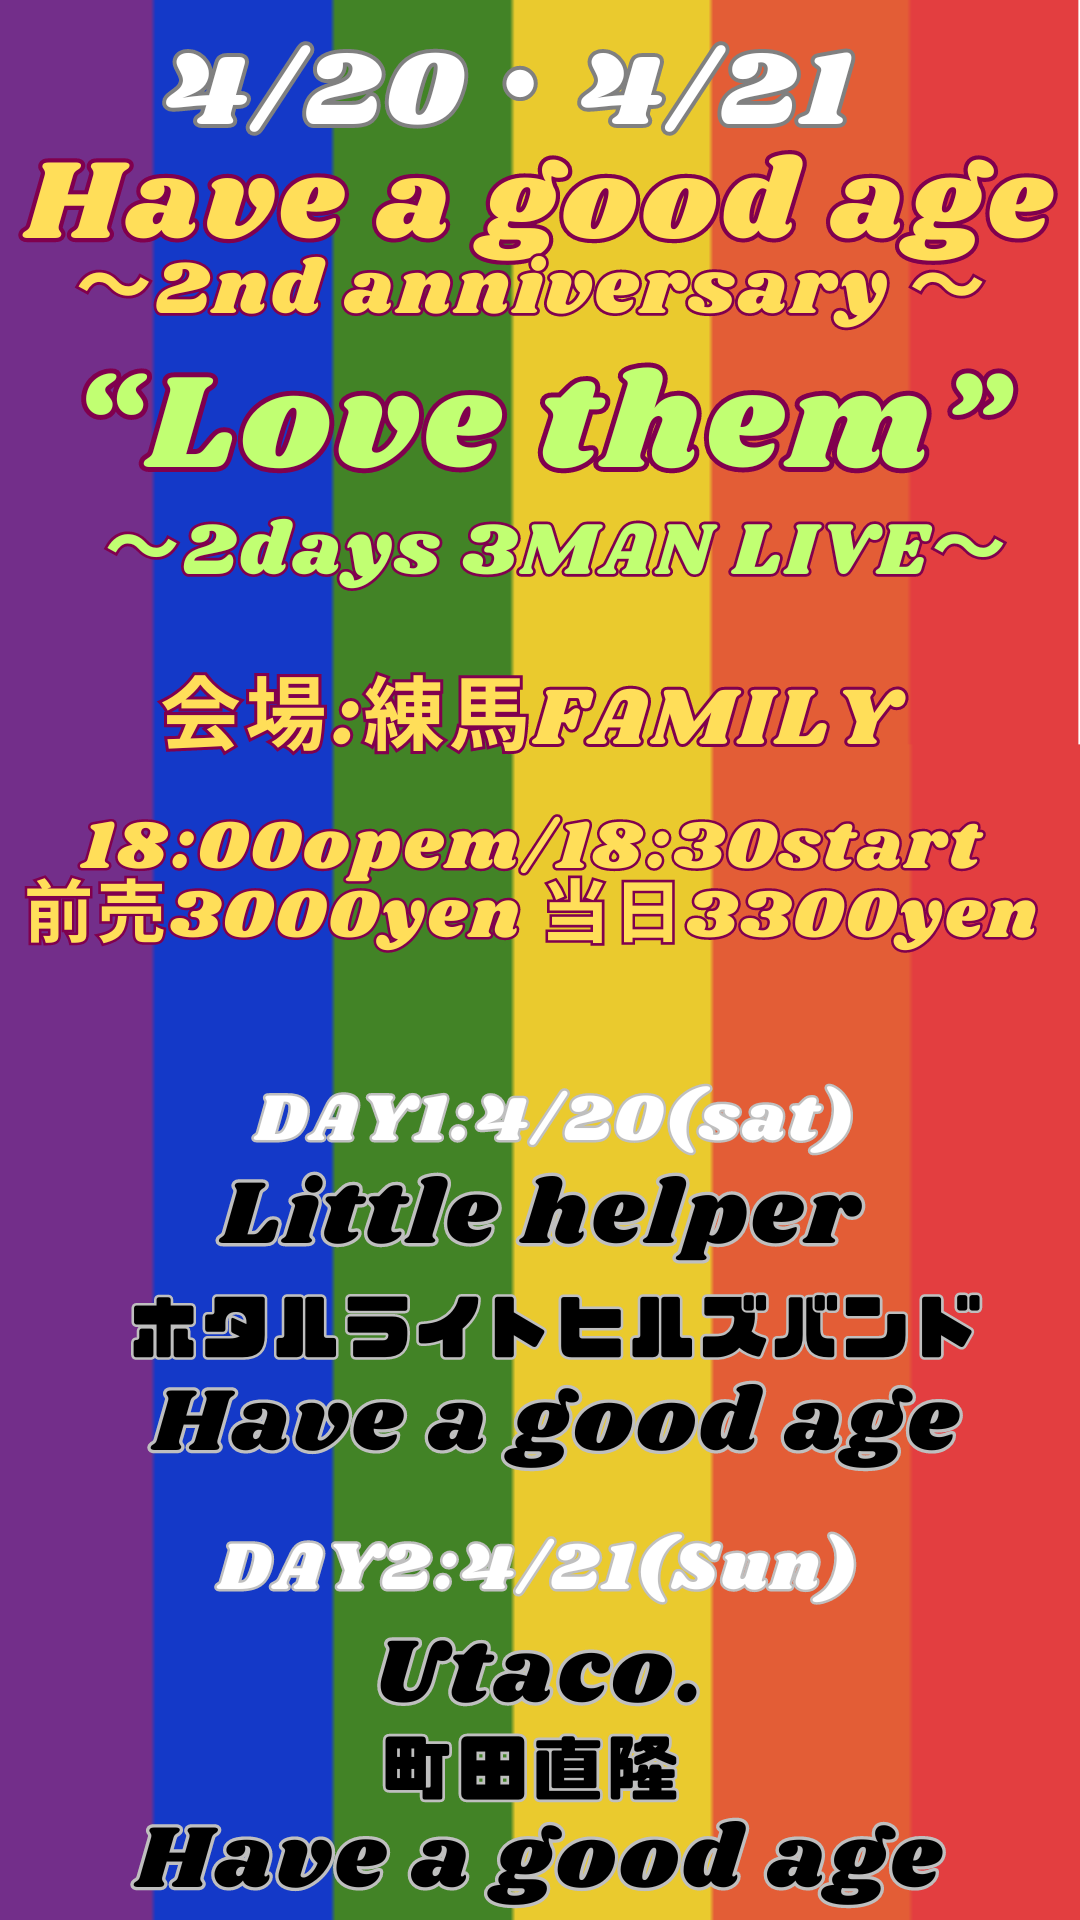 FAMILY SPECIAL 3MAN LIVE!!! 「THANK YOU FOR THE MUSIC」 17:30open/18:00start TICKET:3000円（D別） 出演：One p